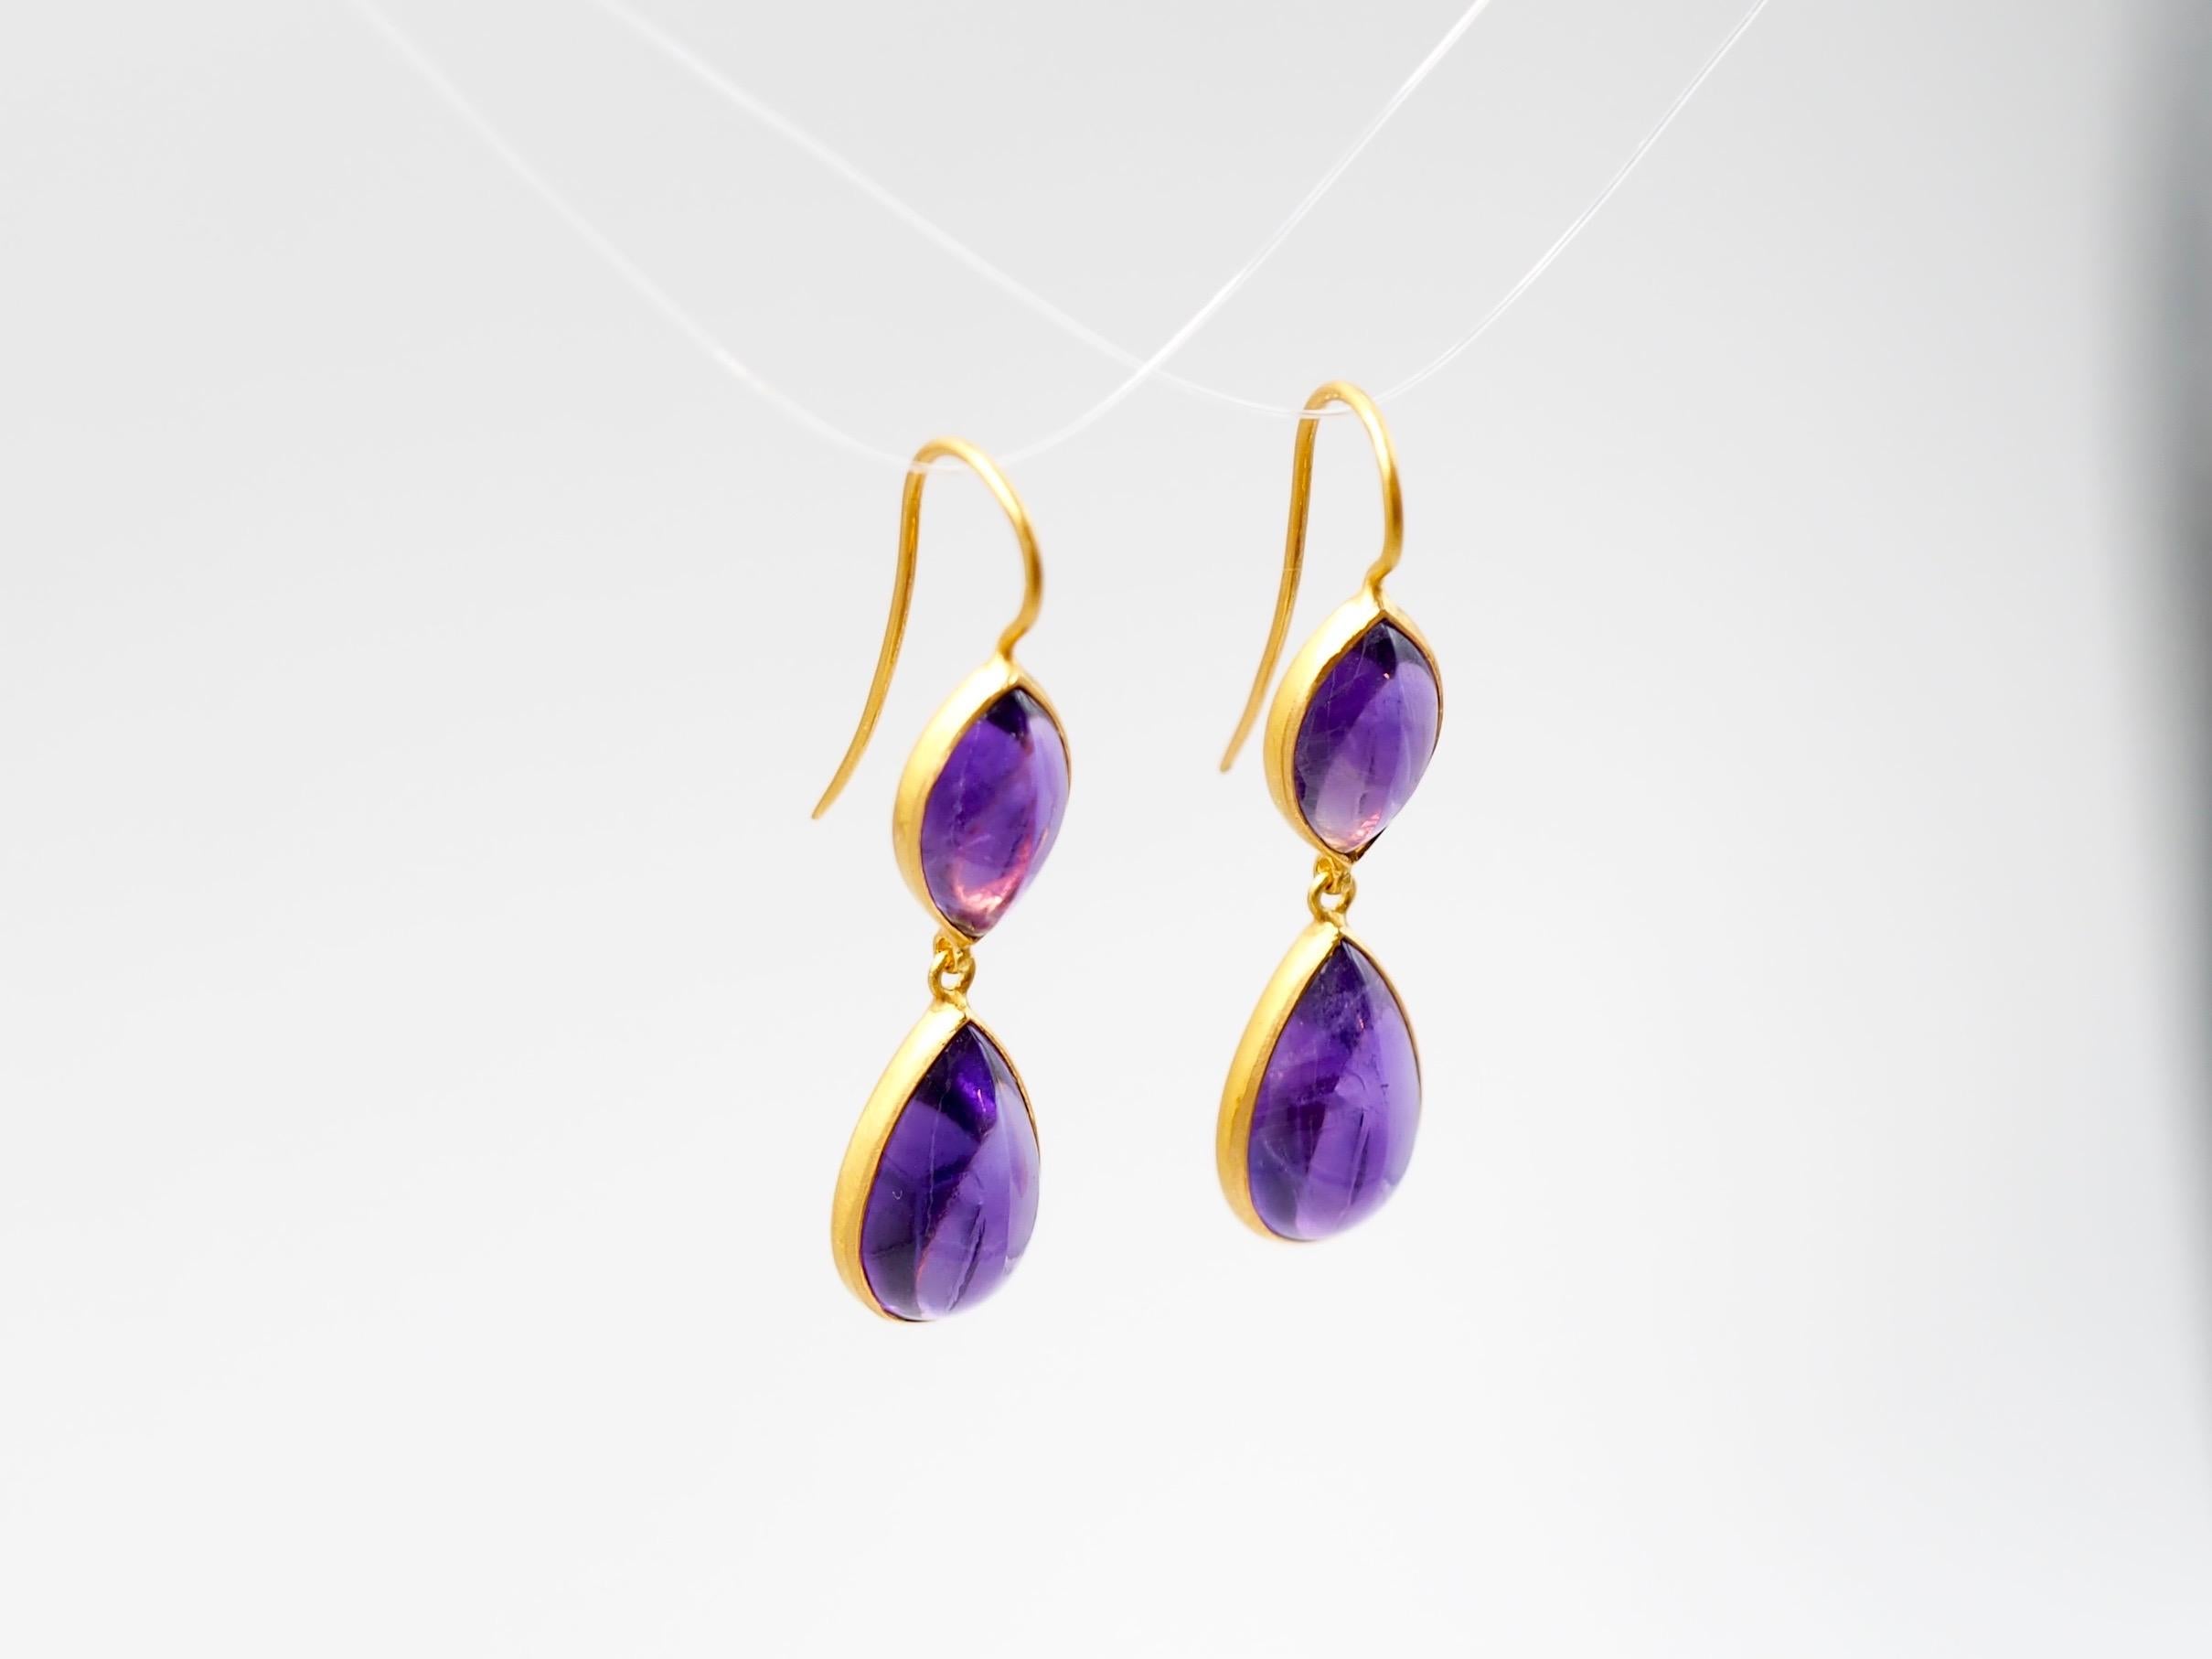 These earrings by Scrives are made of 4 amethyst cabochons for a total weight of around 15.77 cts. The top stones have a marquise cabochon shape and the bottom stones are pear / drop shape large amethyst cabochons.  
The stones are simply set in 22